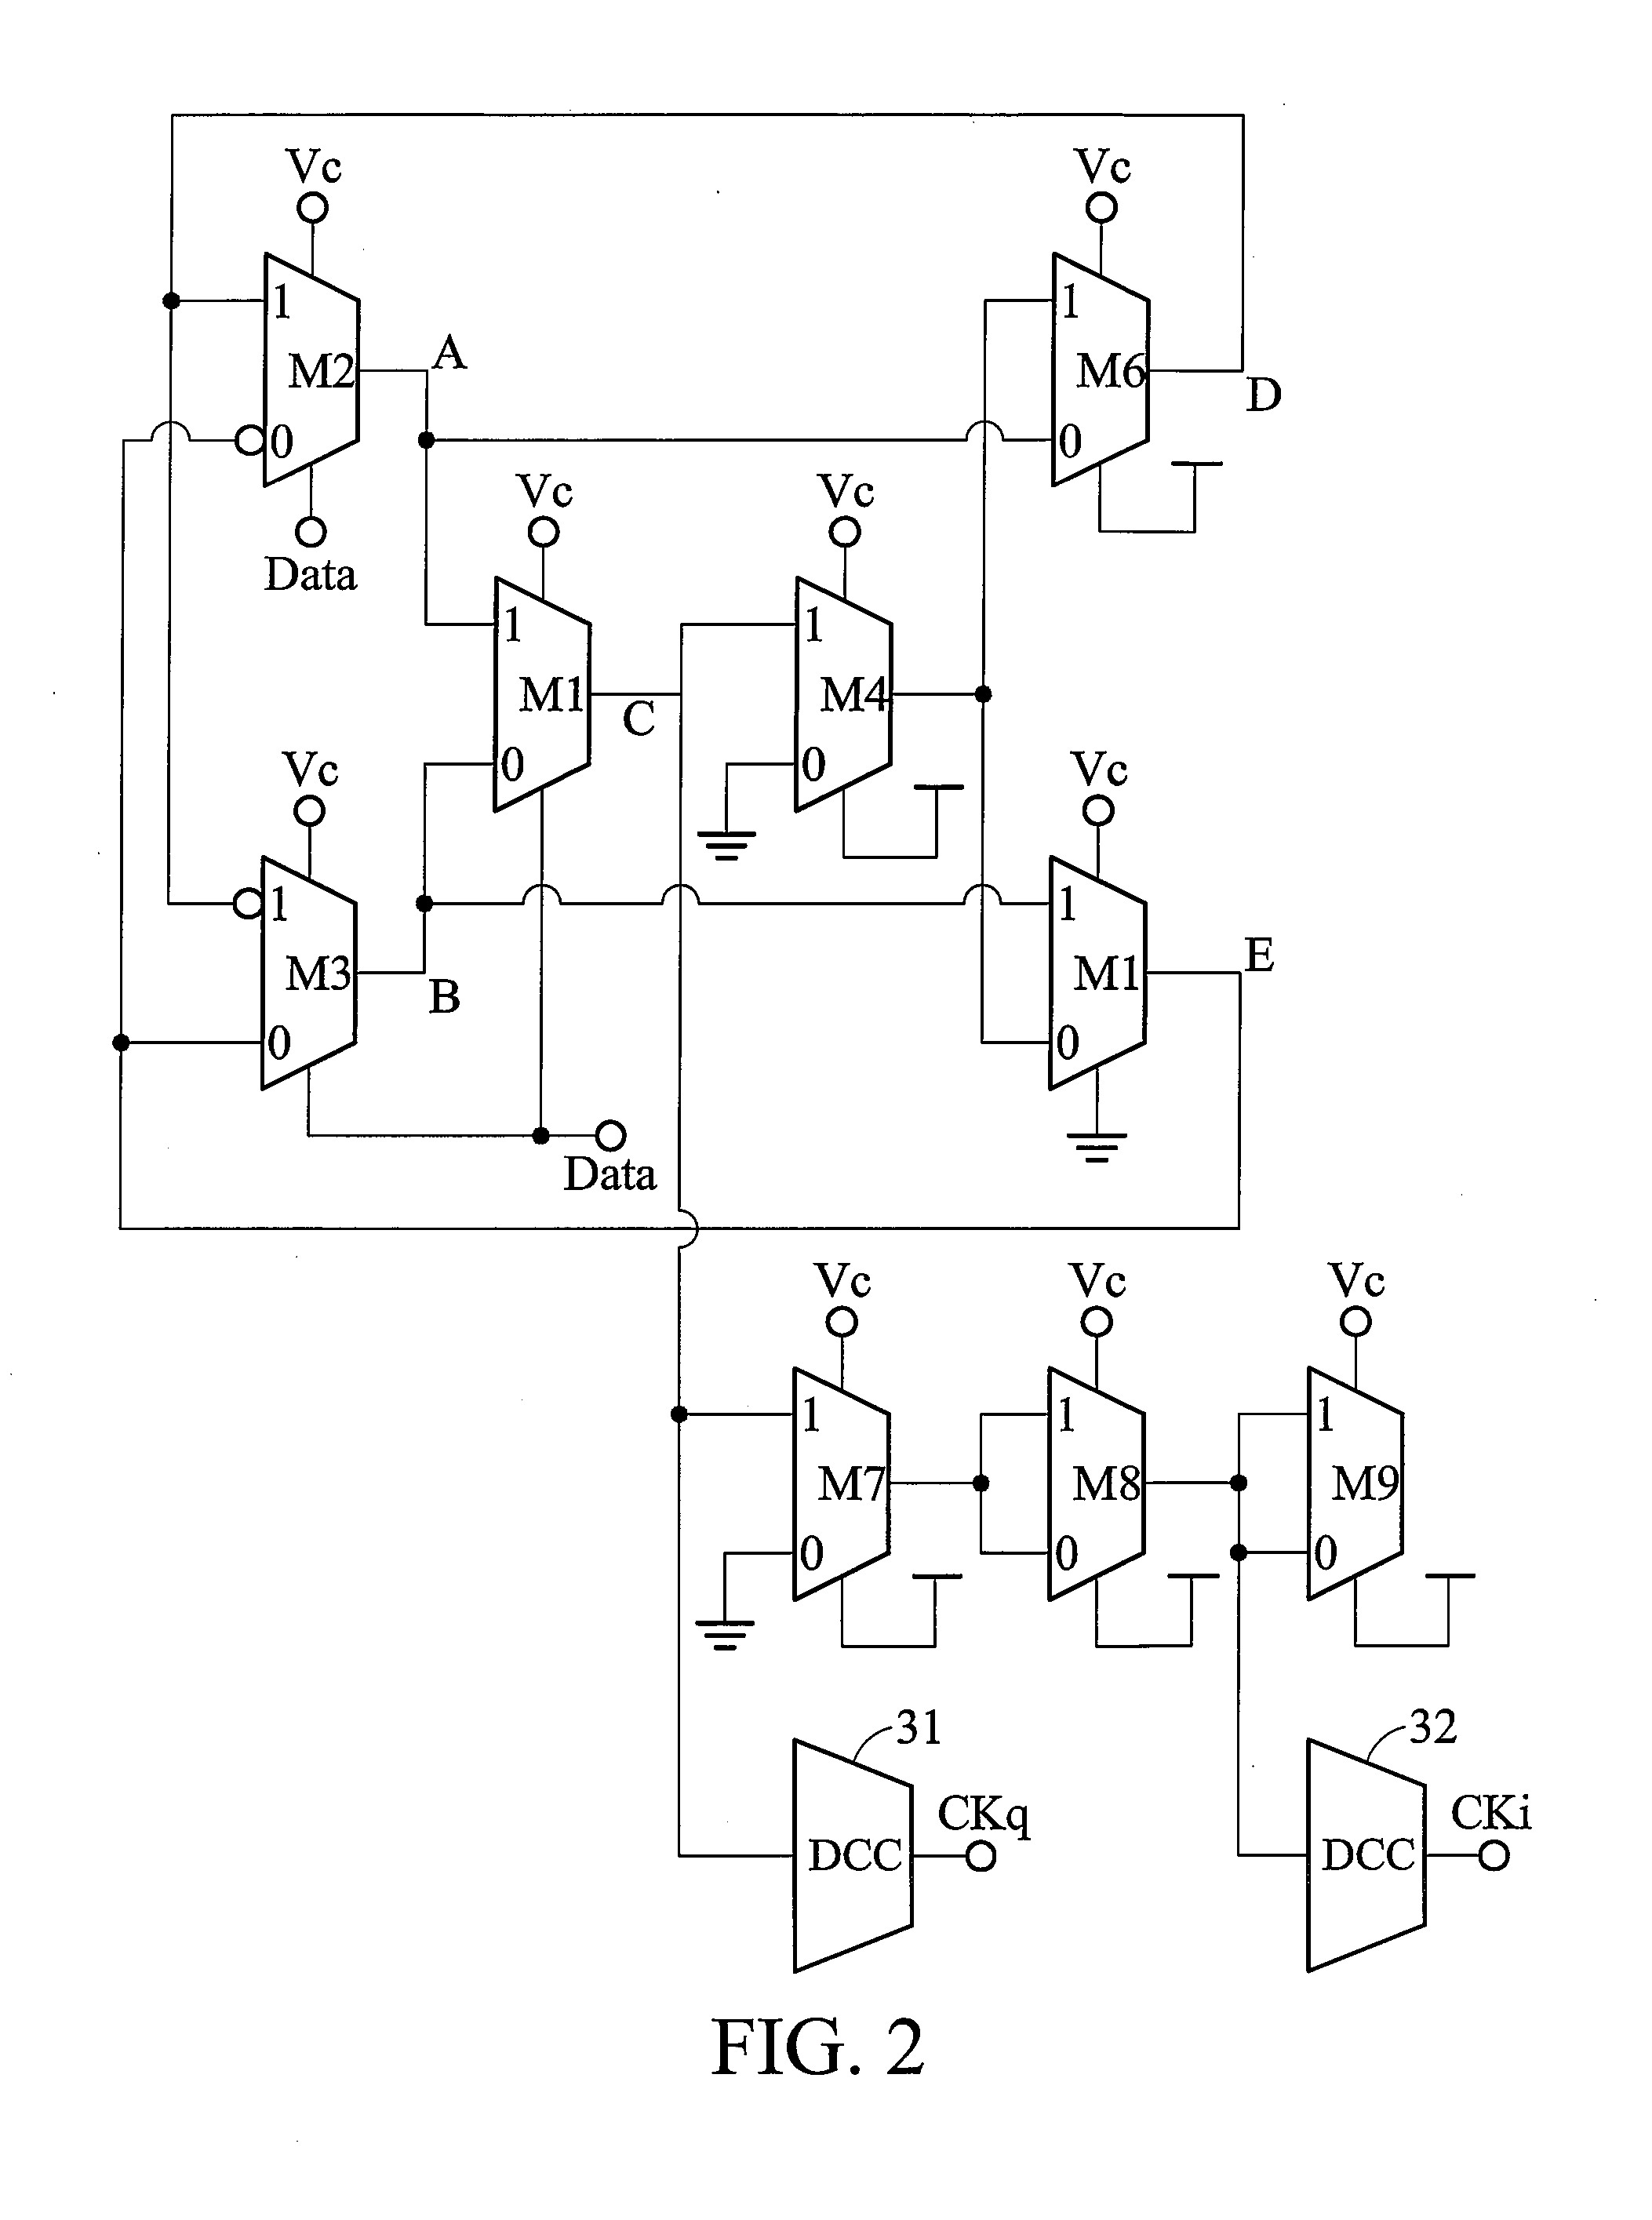 Multi-band burst-mode clock and data recovery circuit